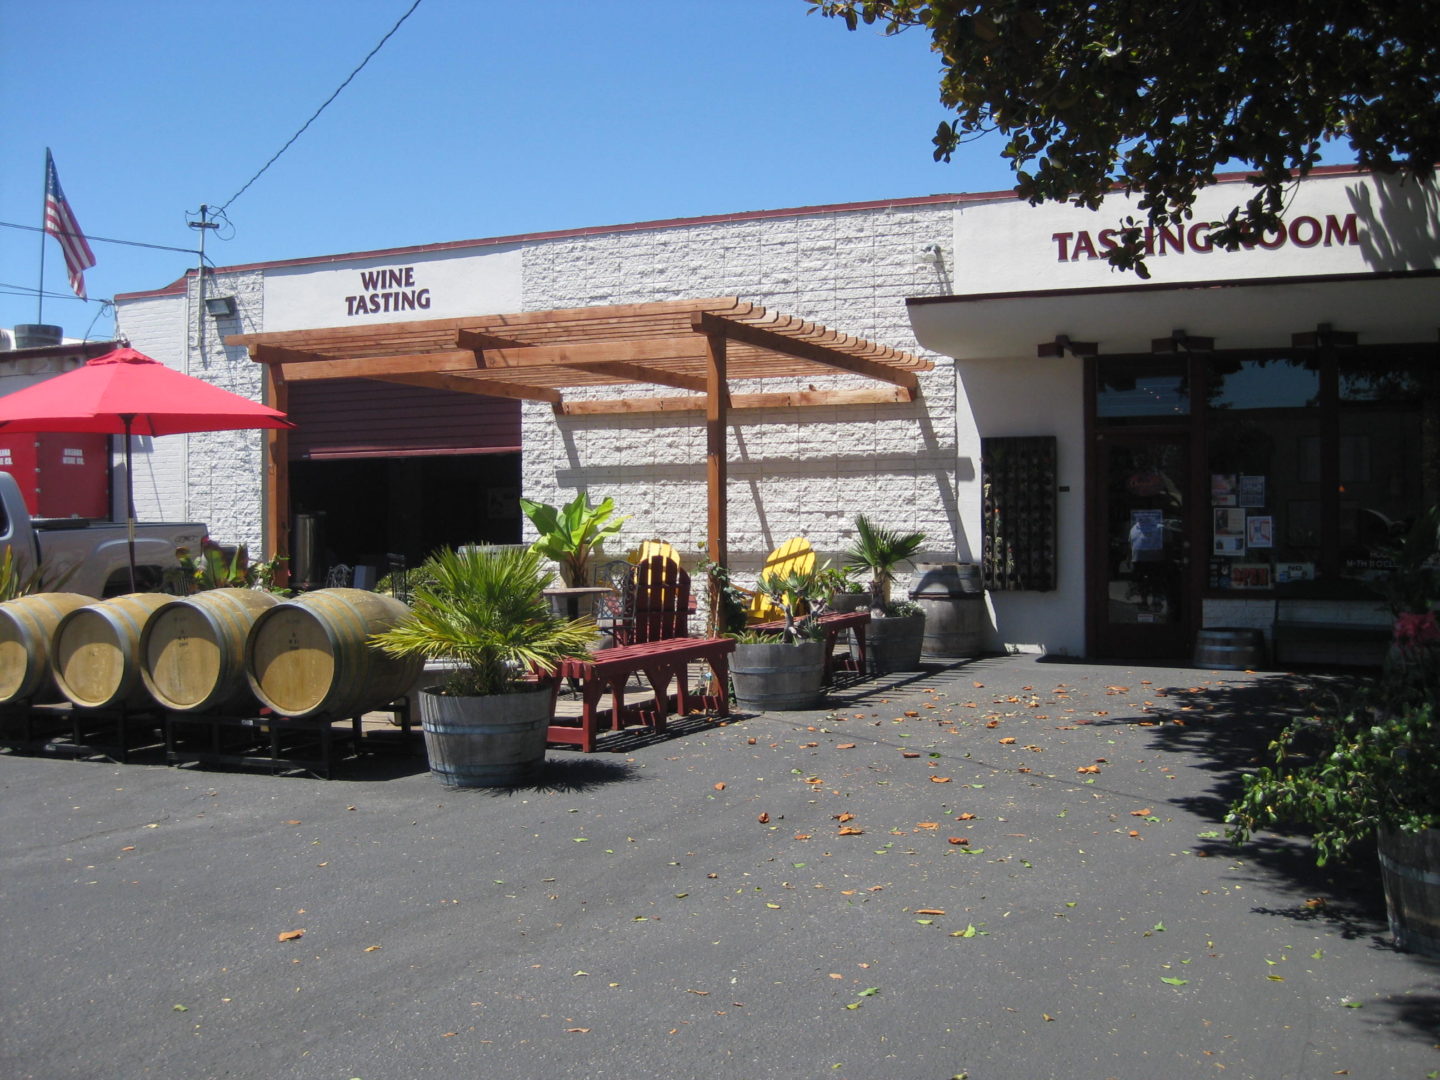 patio outside of wine tasting room. red umbrellas, wine barrels, and string lights